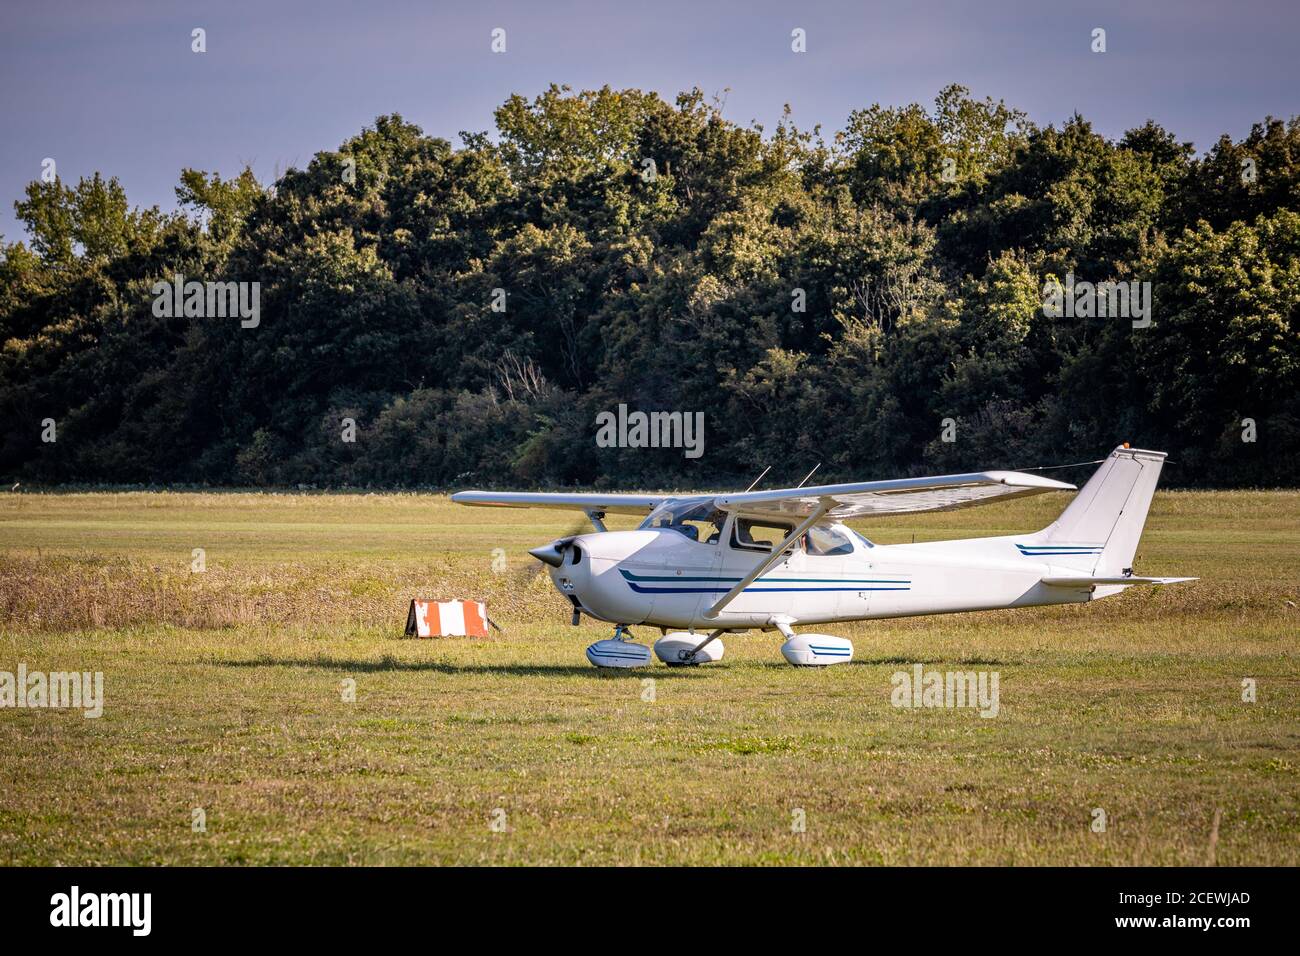 Small white airplane landing on a grass field during a sunny day Stock Photo